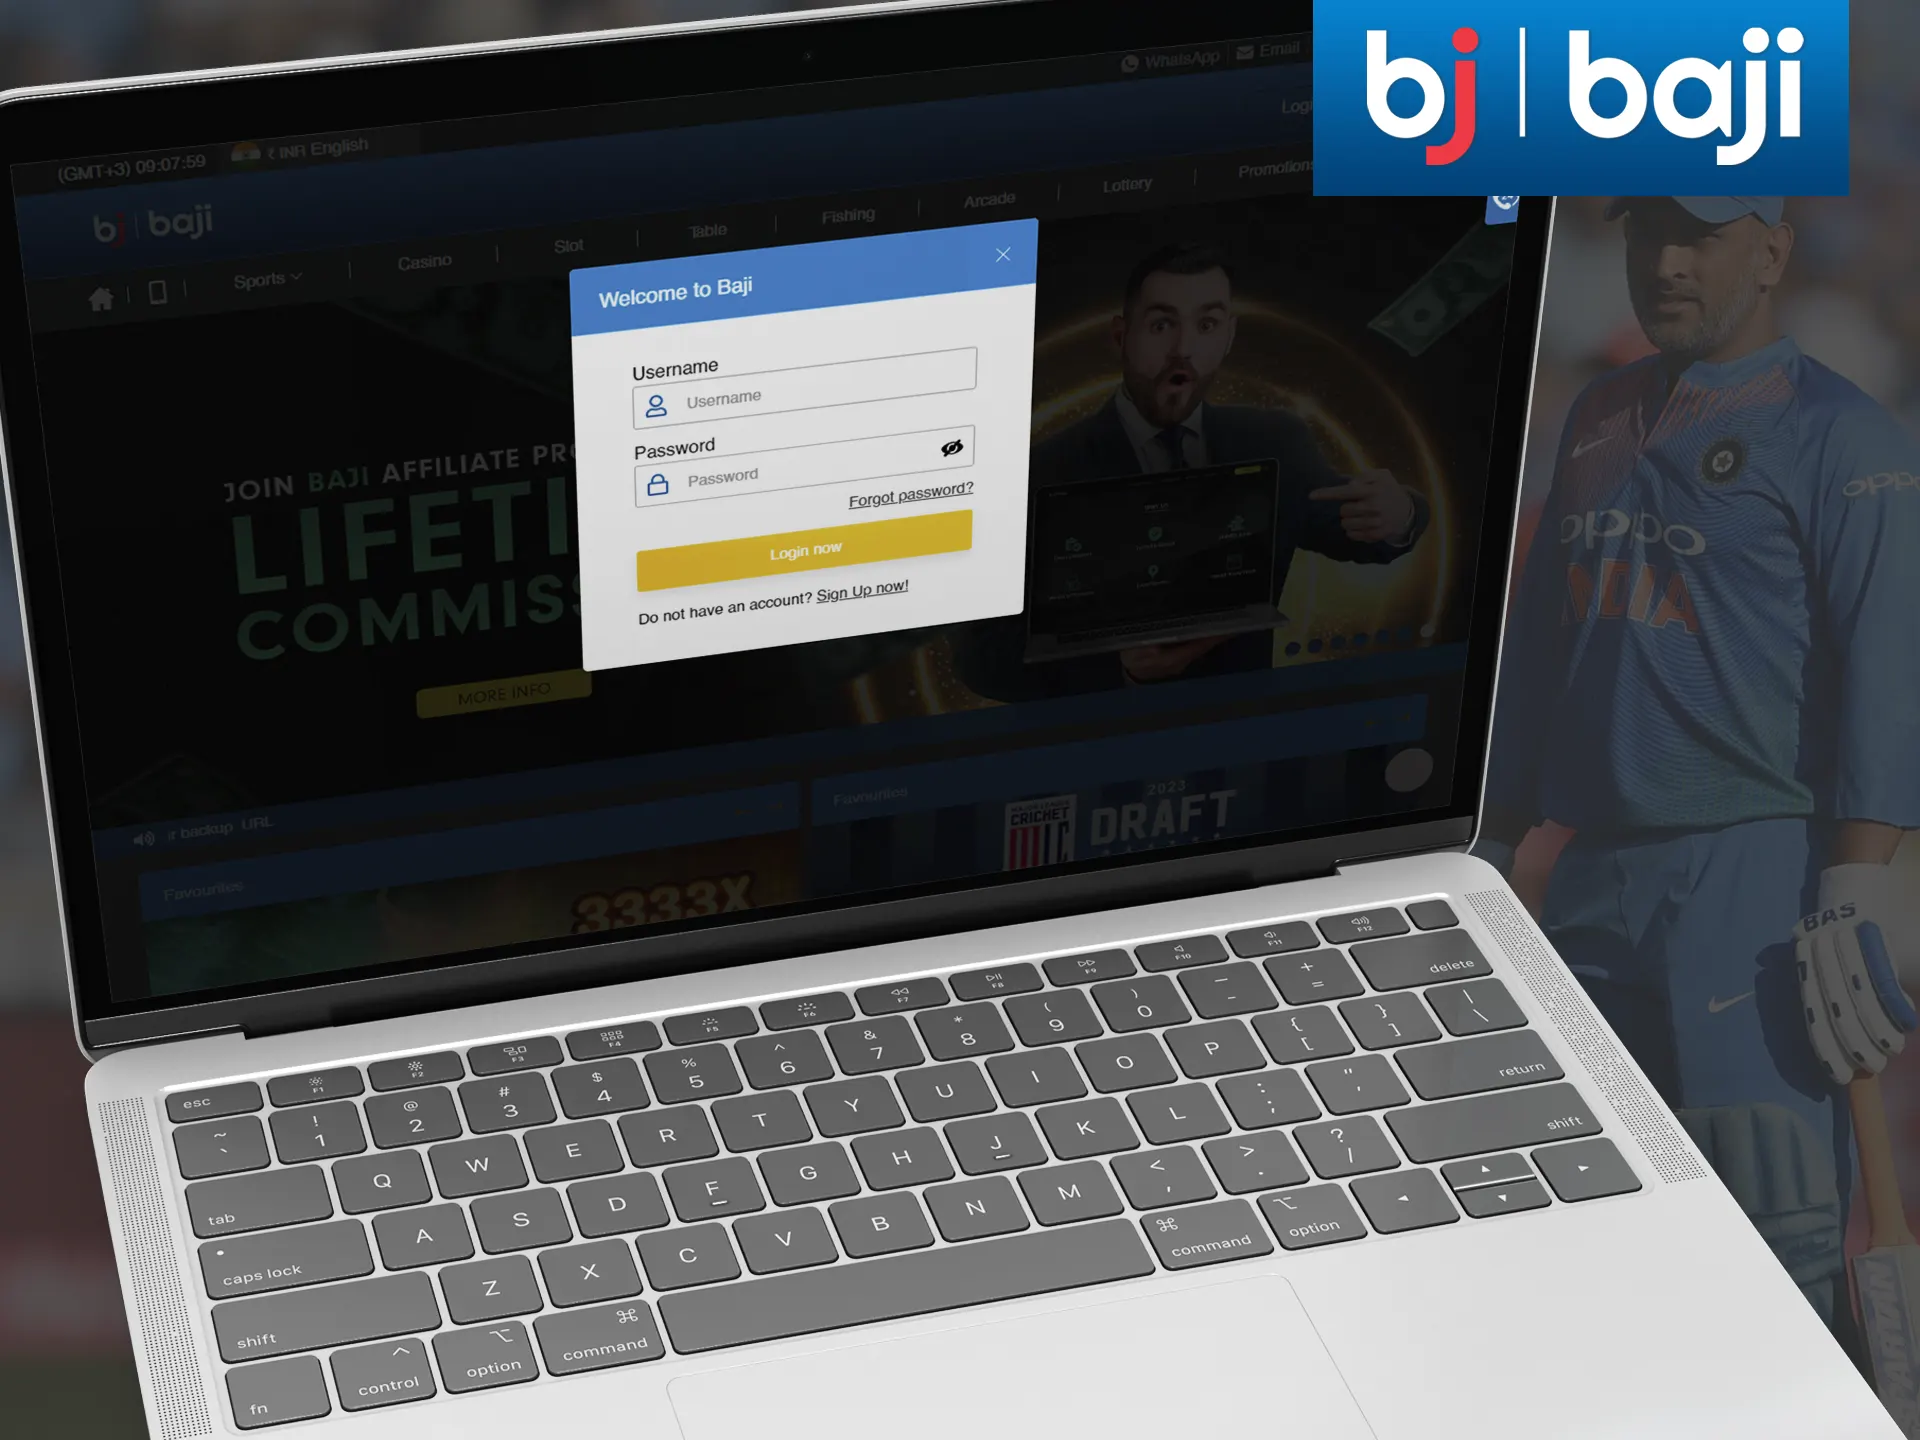 Log into your Baji Live account before placing bets.